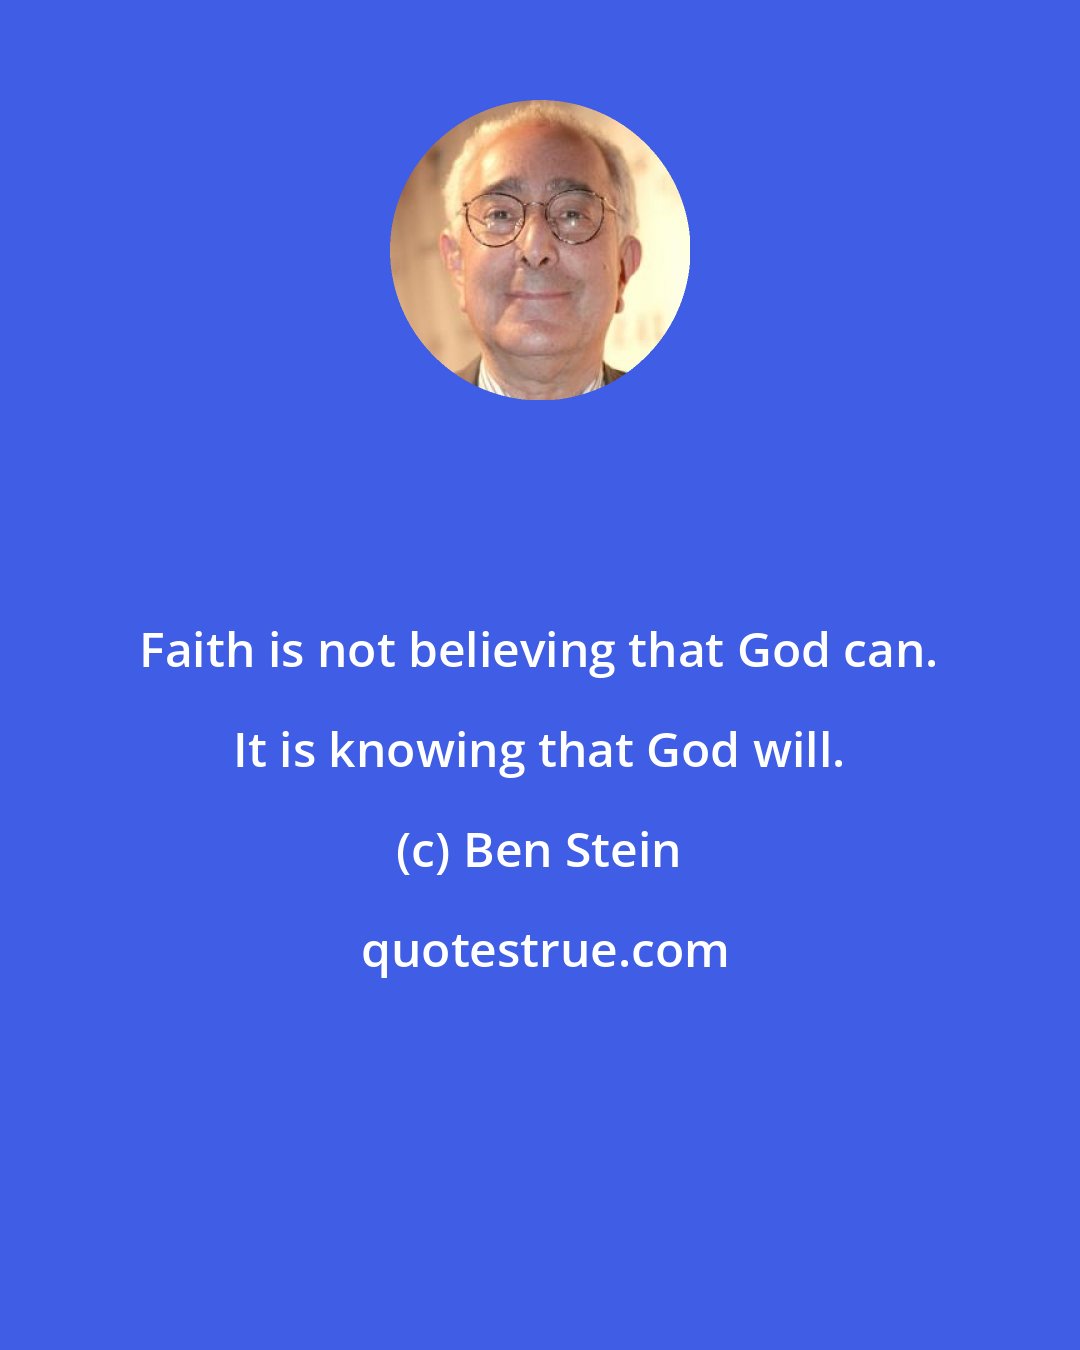 Ben Stein: Faith is not believing that God can. It is knowing that God will.